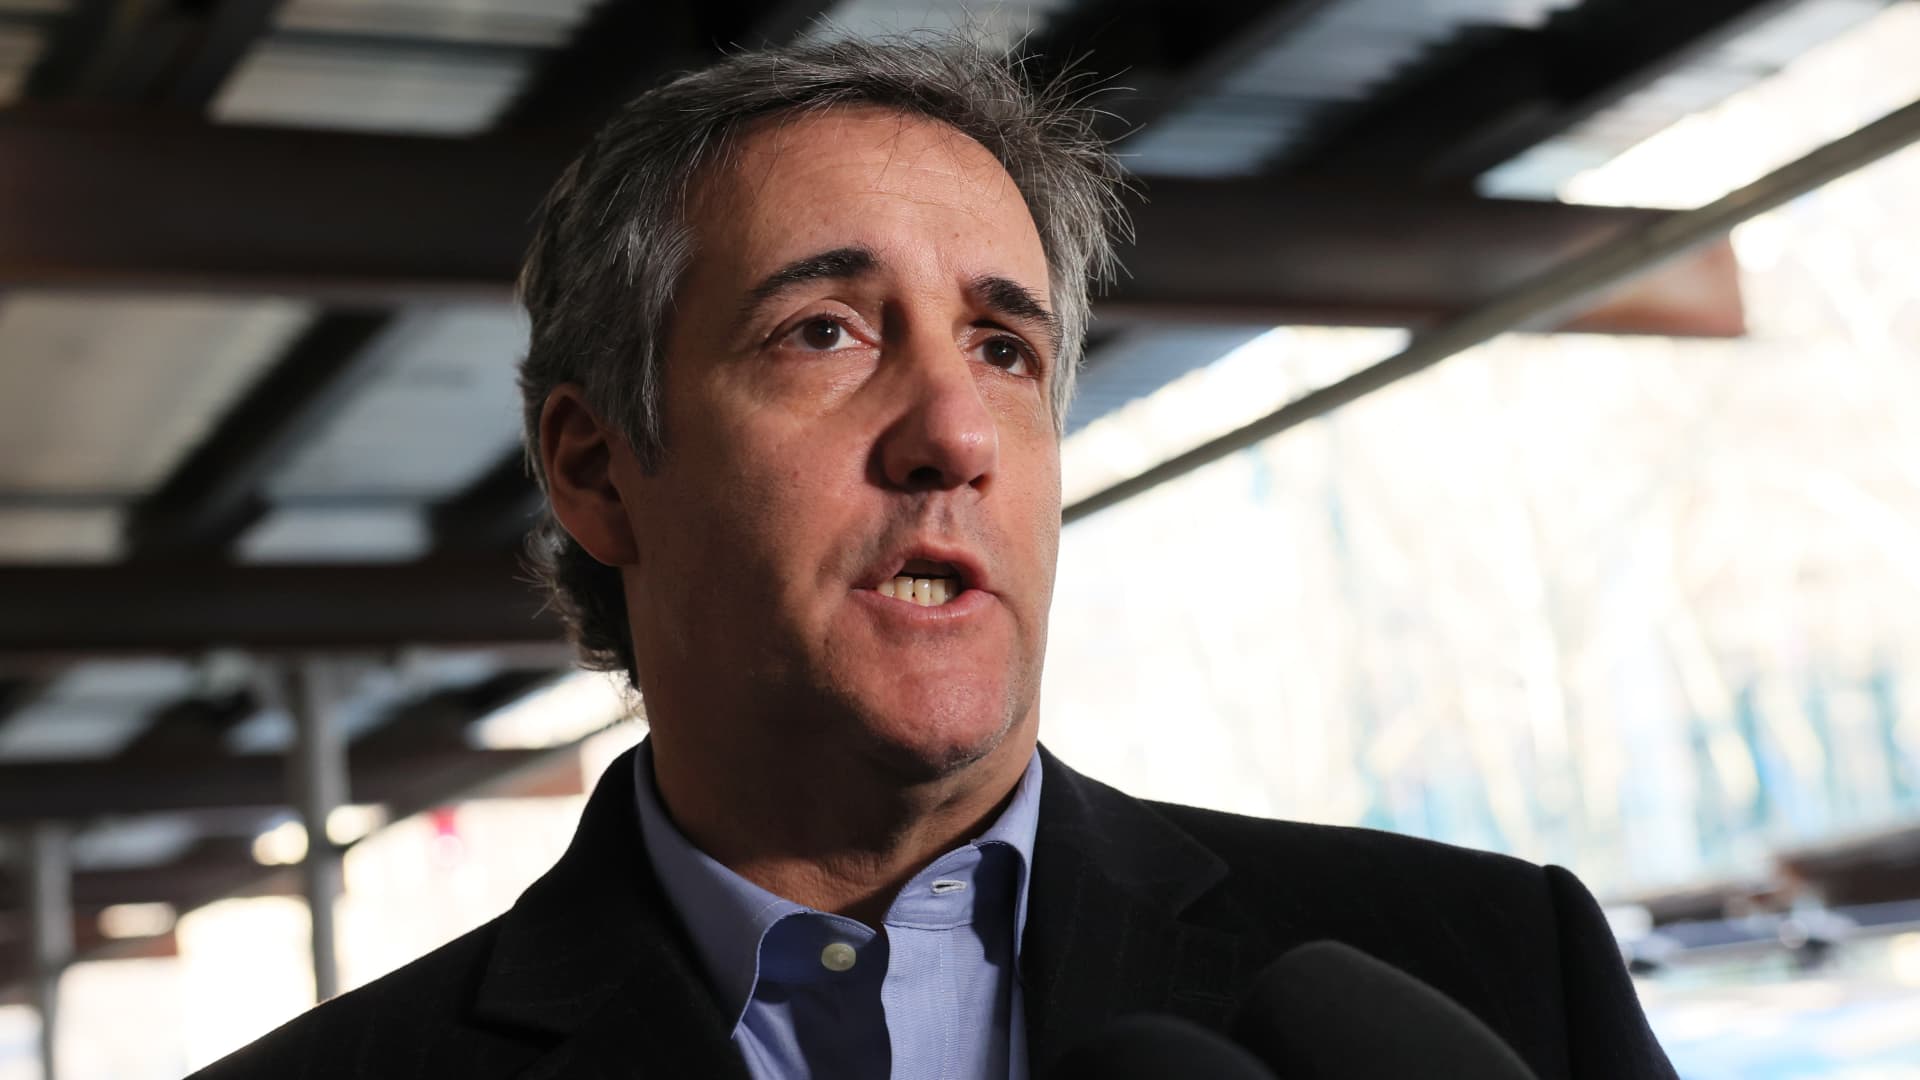 Former Trump lawyer Michael Cohen to testify to grand jury in Stormy Daniels payoff probe